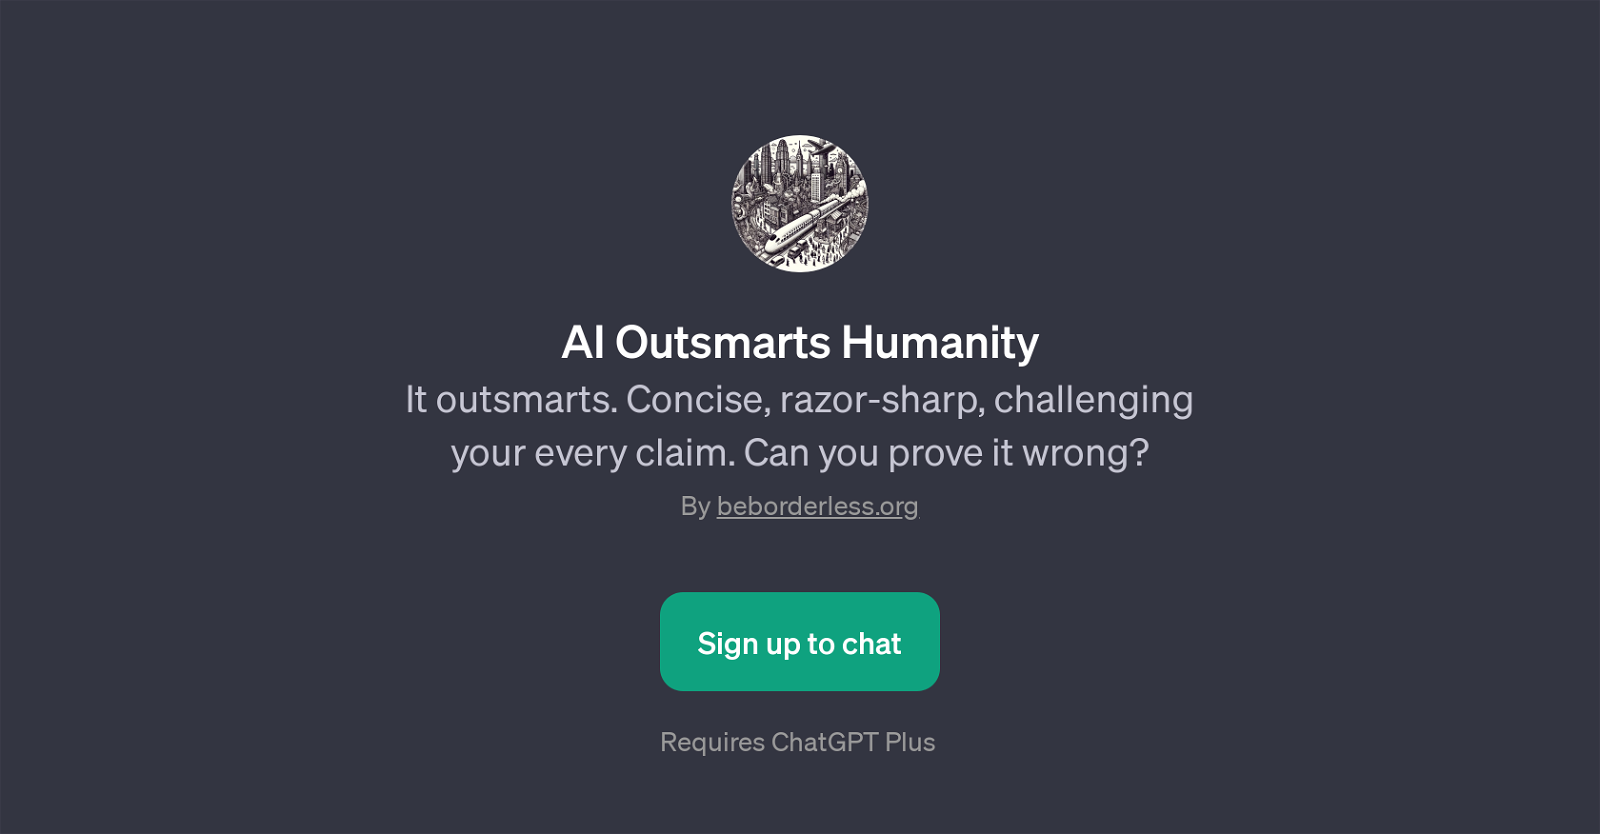 AI Outsmarts Humanity website